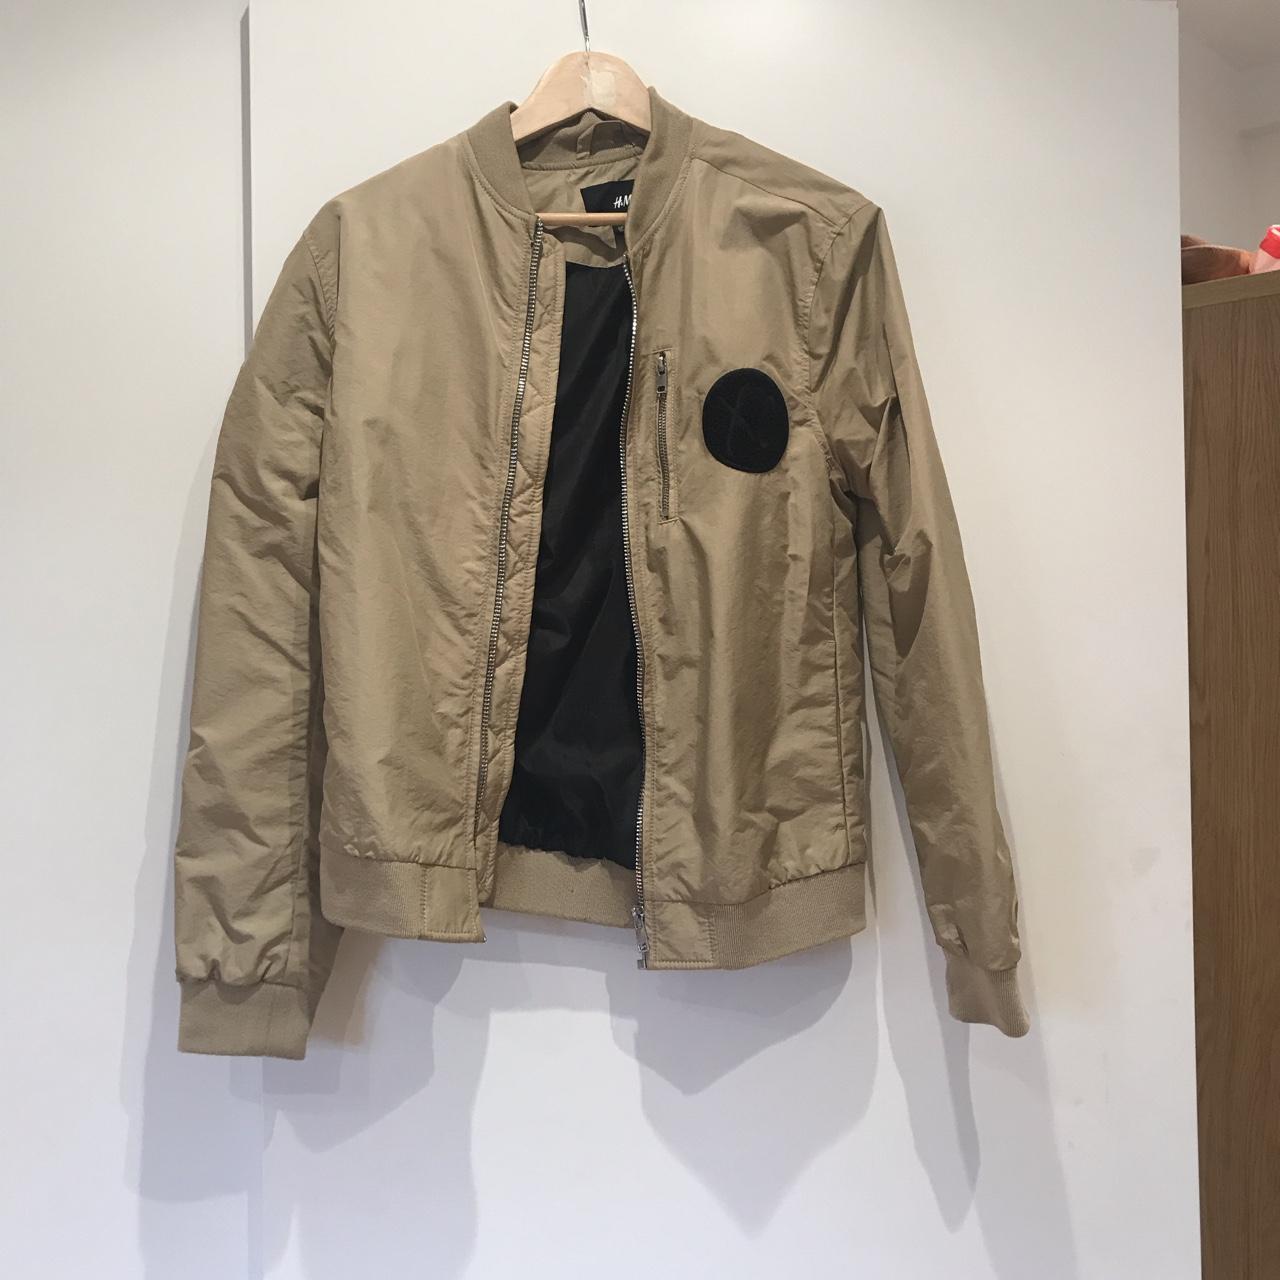 The Weeknd H&M Jacket  The Weeknd H&M Bomber Jacket